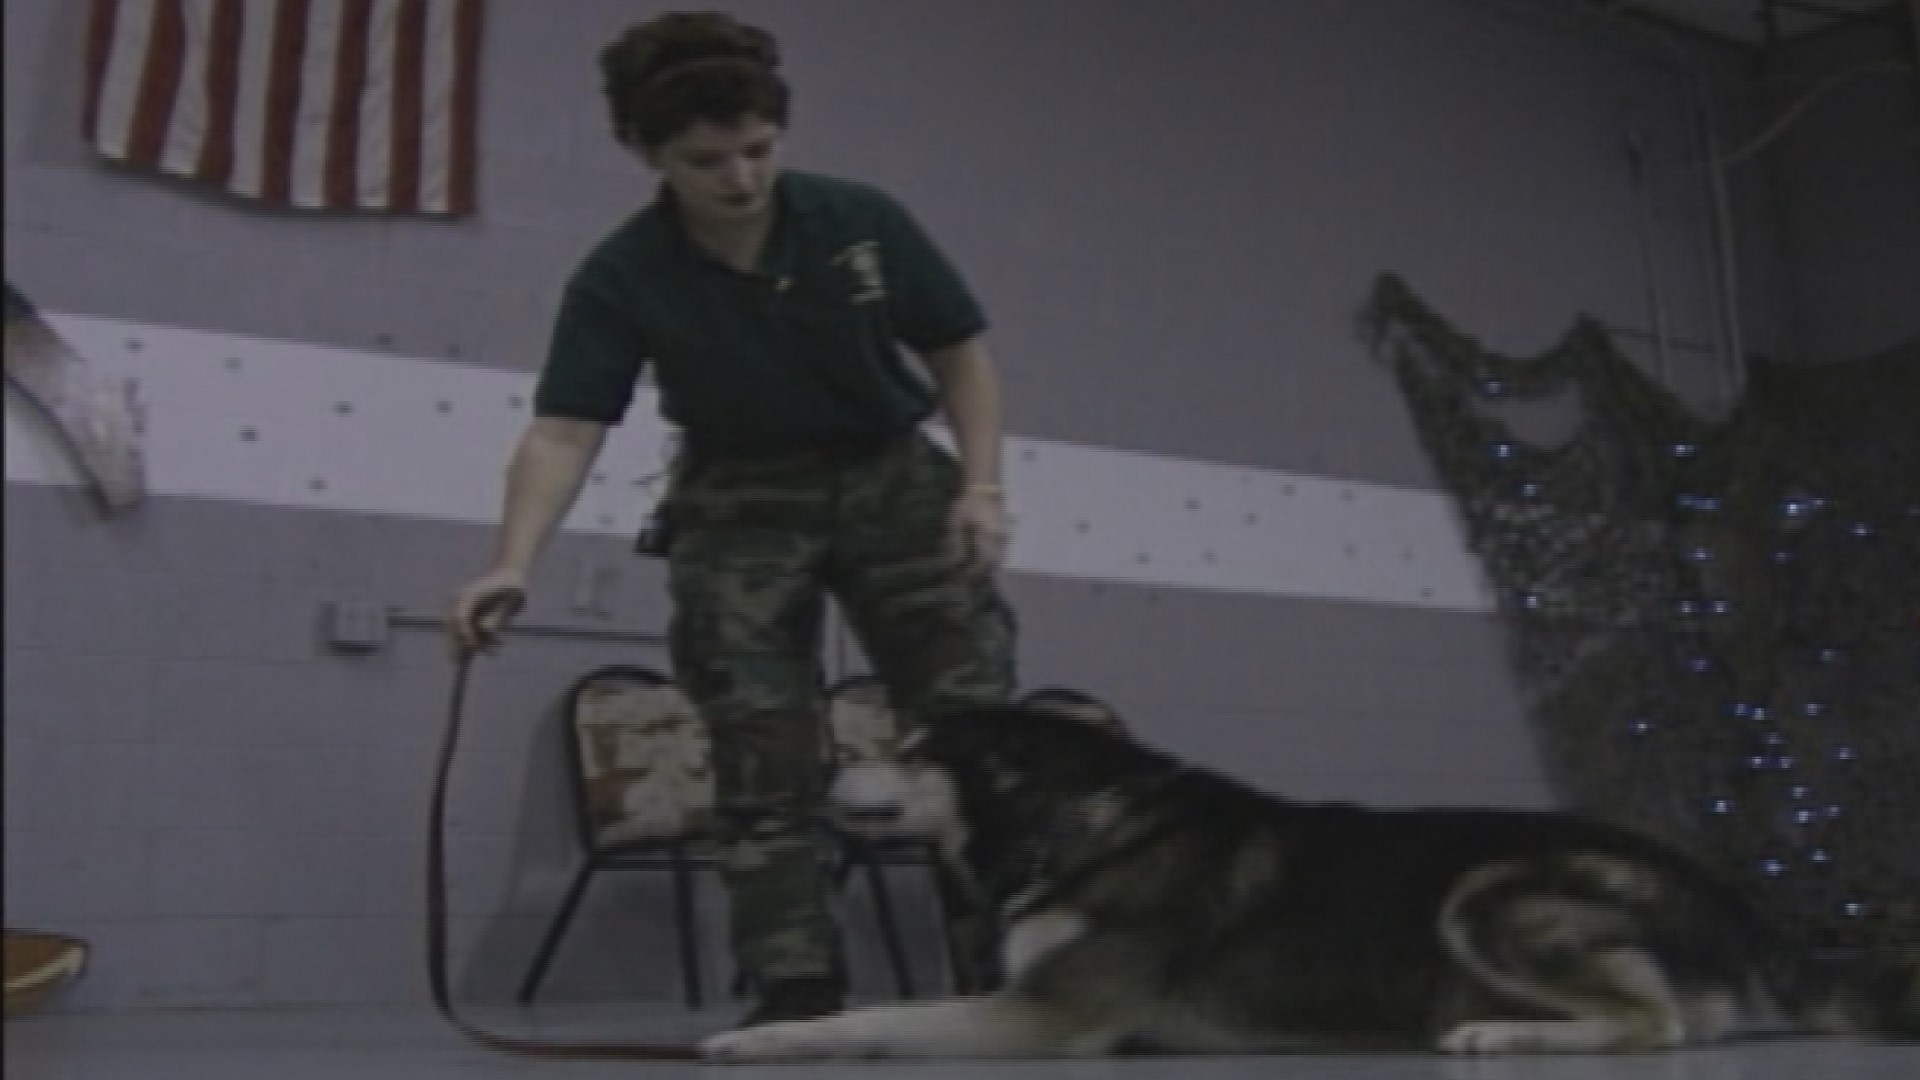 Pay a visit to the past and a visit to a northern Ohio doggie boot camp in this WTOL 11 report from Dec. 5, 1996.